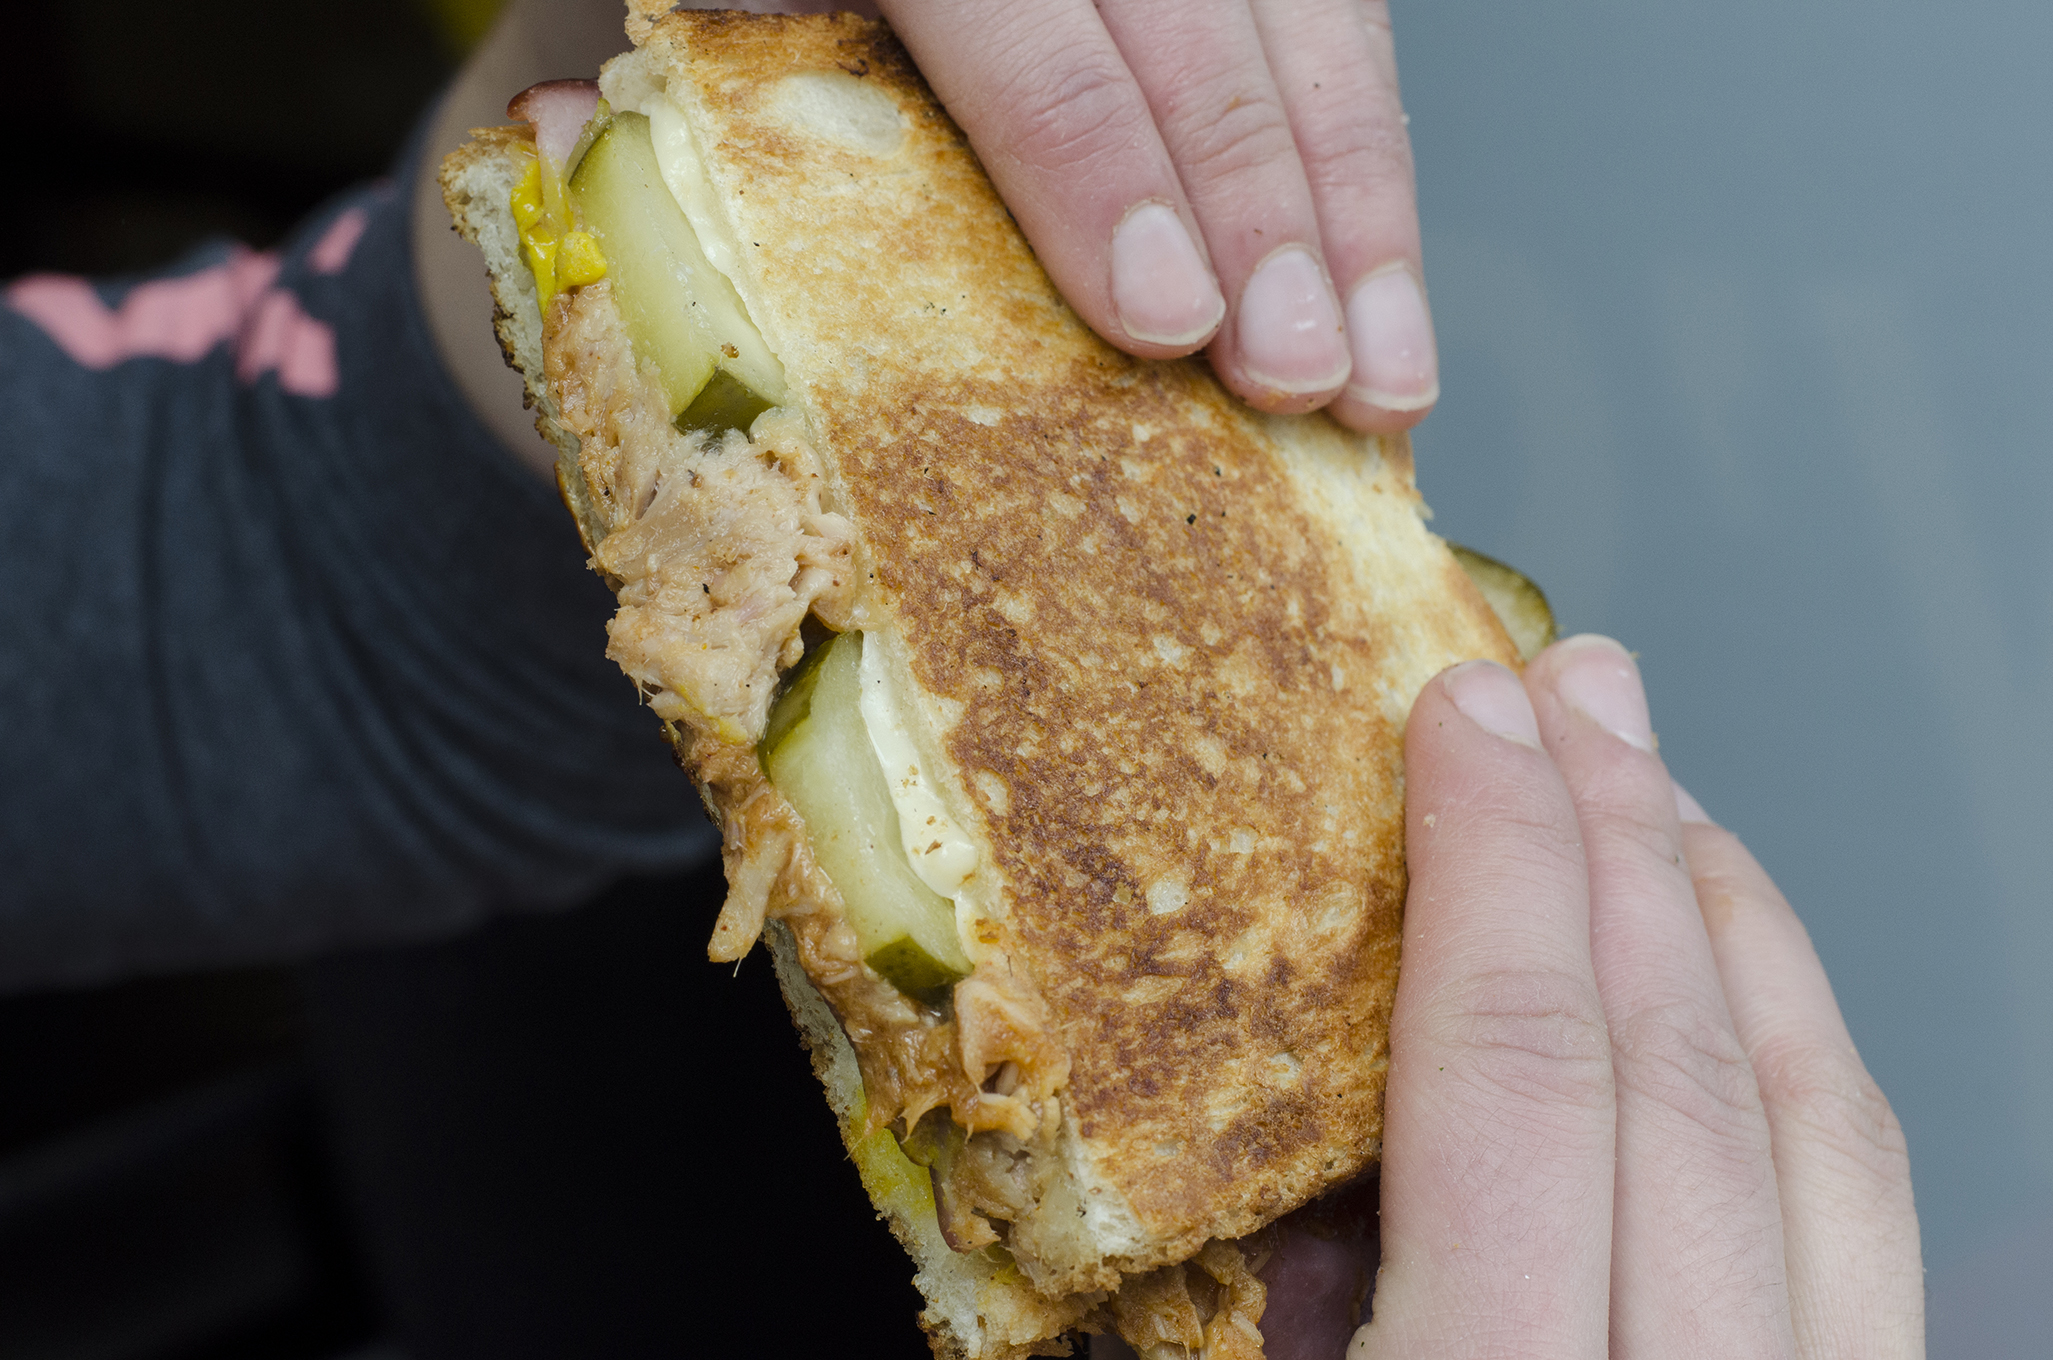 The Cuban grilled cheese sandwich from Toasty's in downtown Windsor, Ontario.